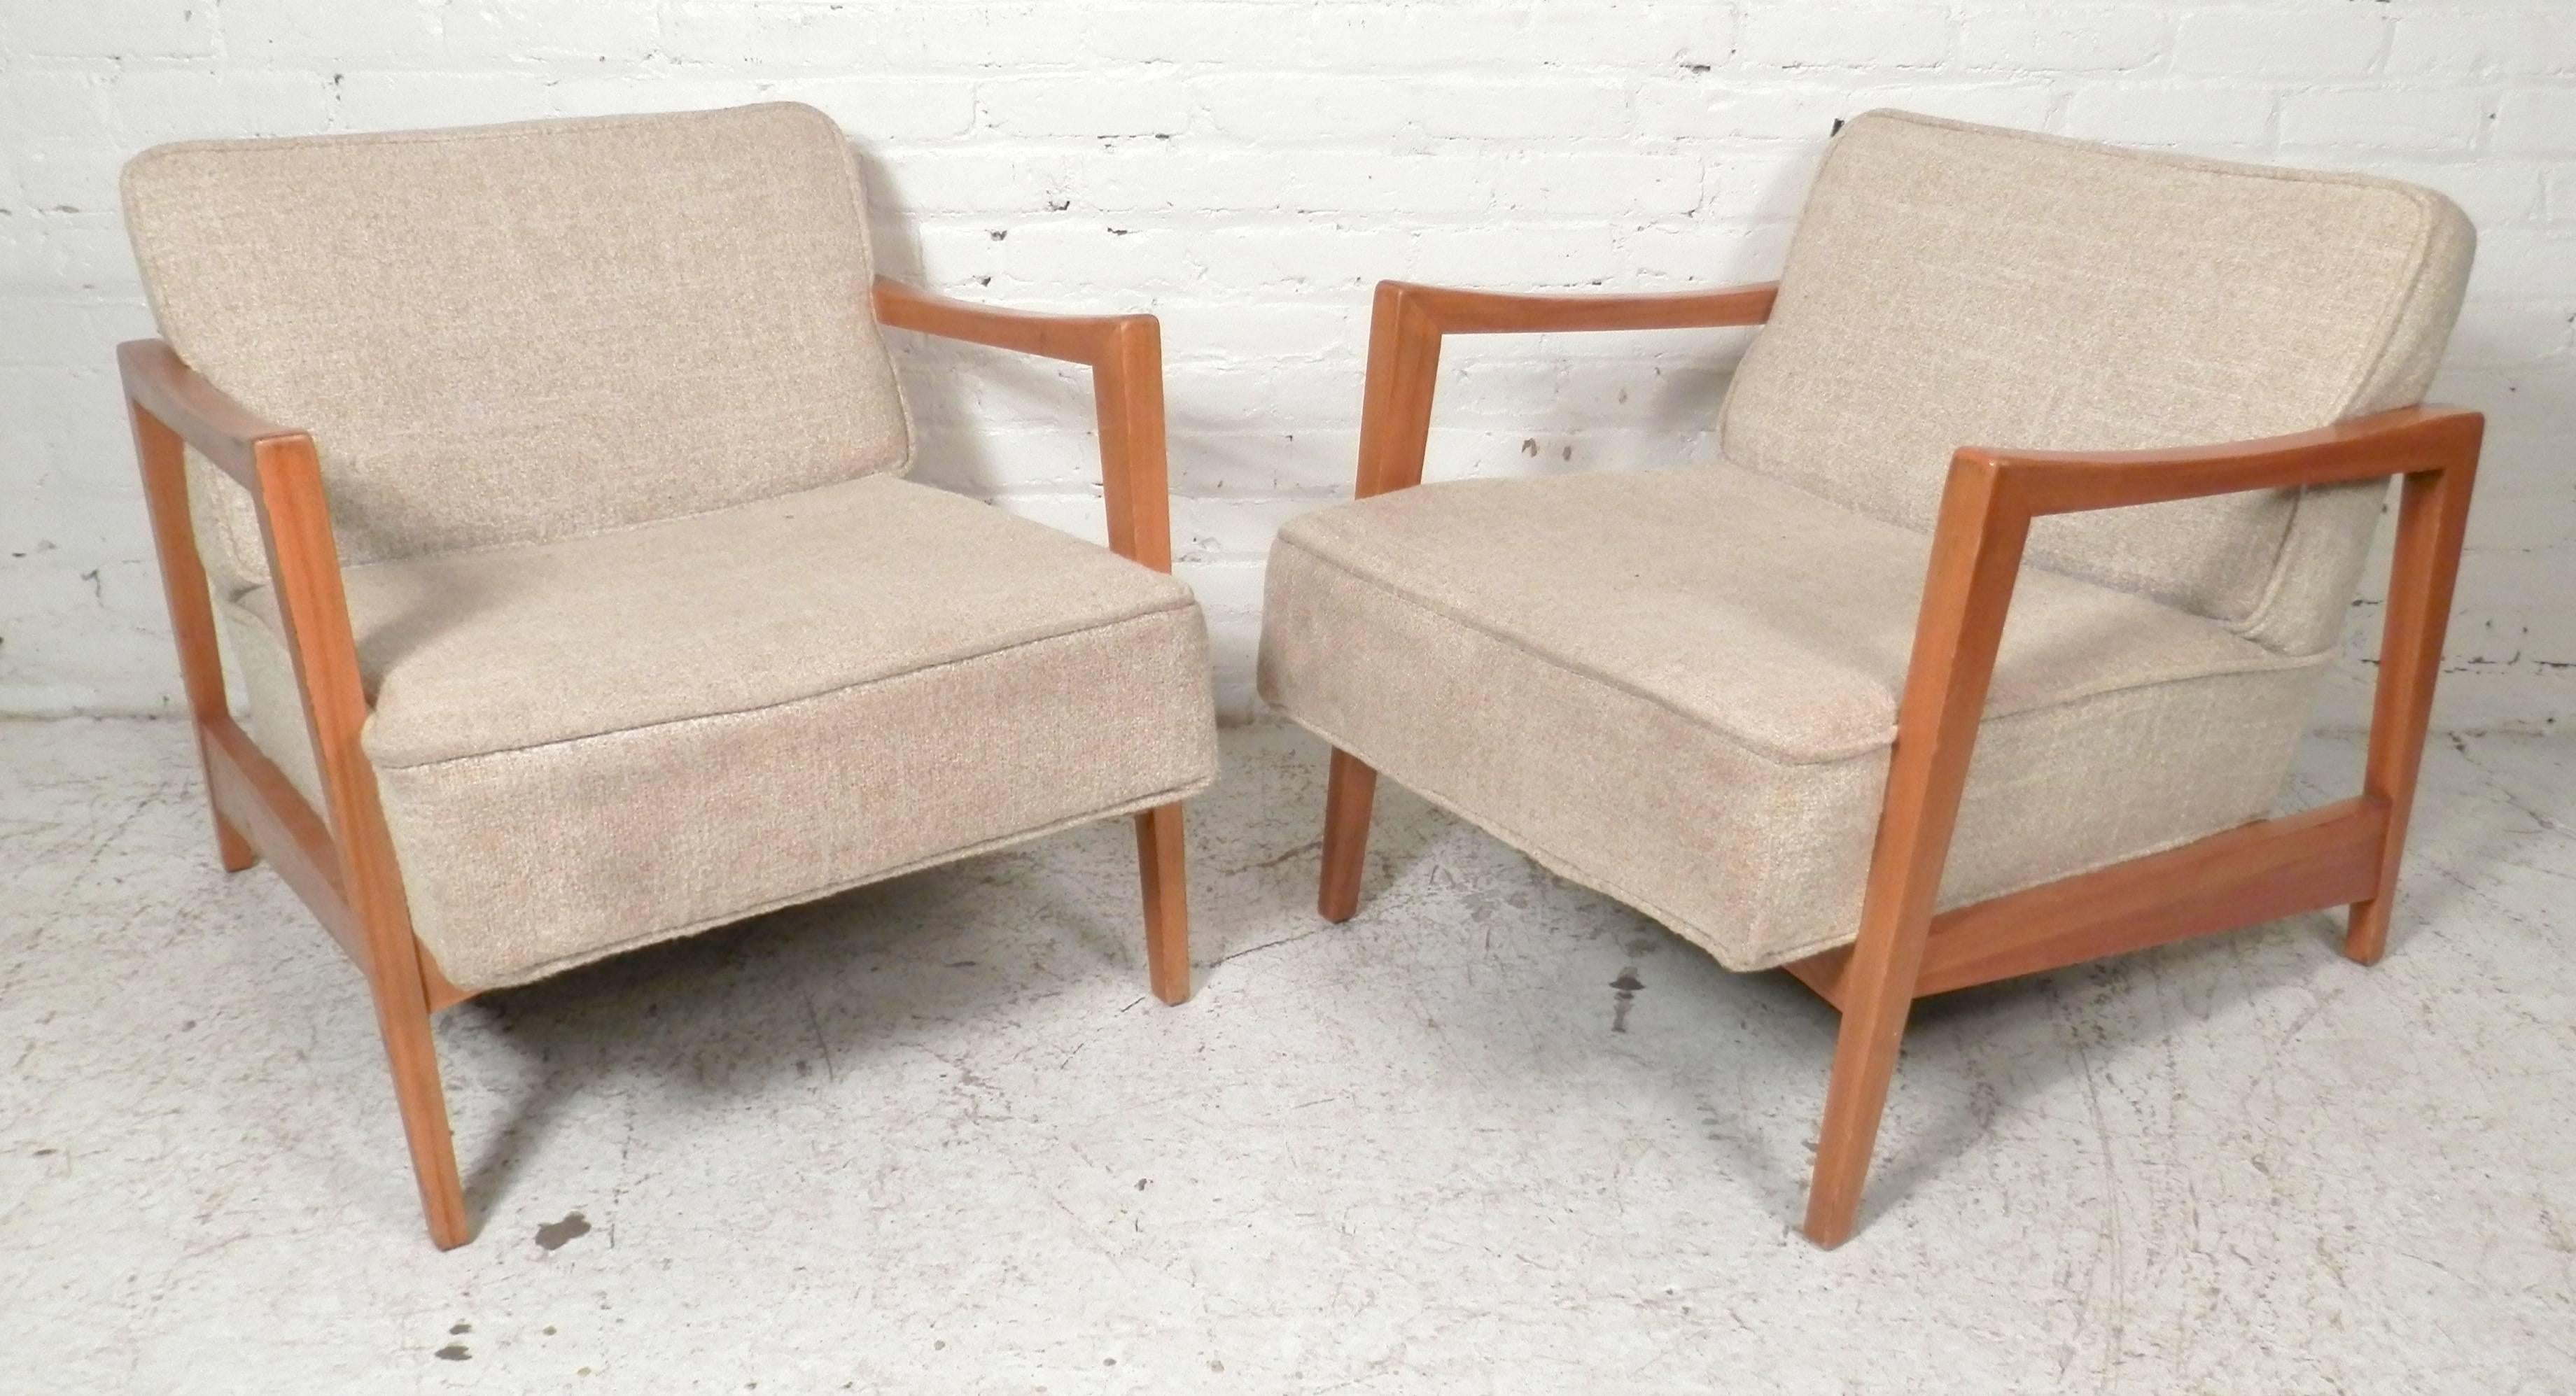 Maple wood frame arm chairs with thick cushioned seat and back. Wood arms have a nice sculpted shape for comfort and style.

(Please confirm item location - NY or NJ - with dealer)
